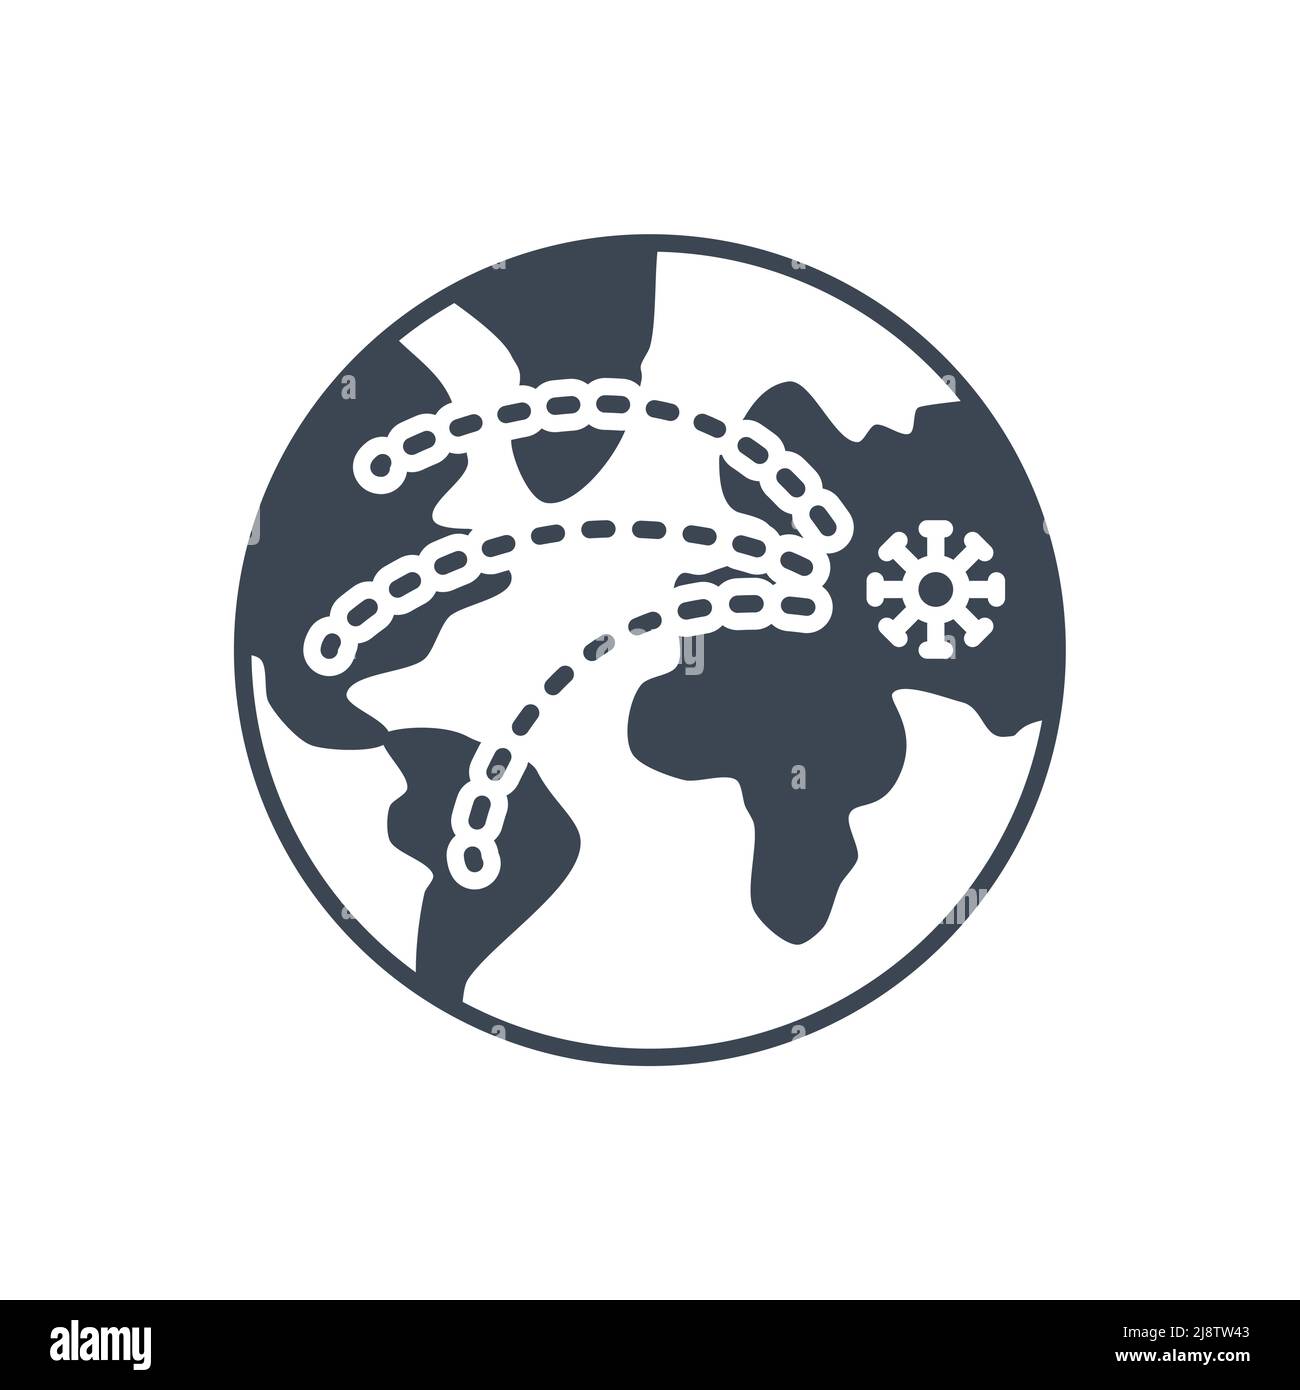 Pandemia related vector glyph icon. The spread of the virus around the globe. Pandemia sign. Isolated on white background. Editable vector illustratio Stock Vector